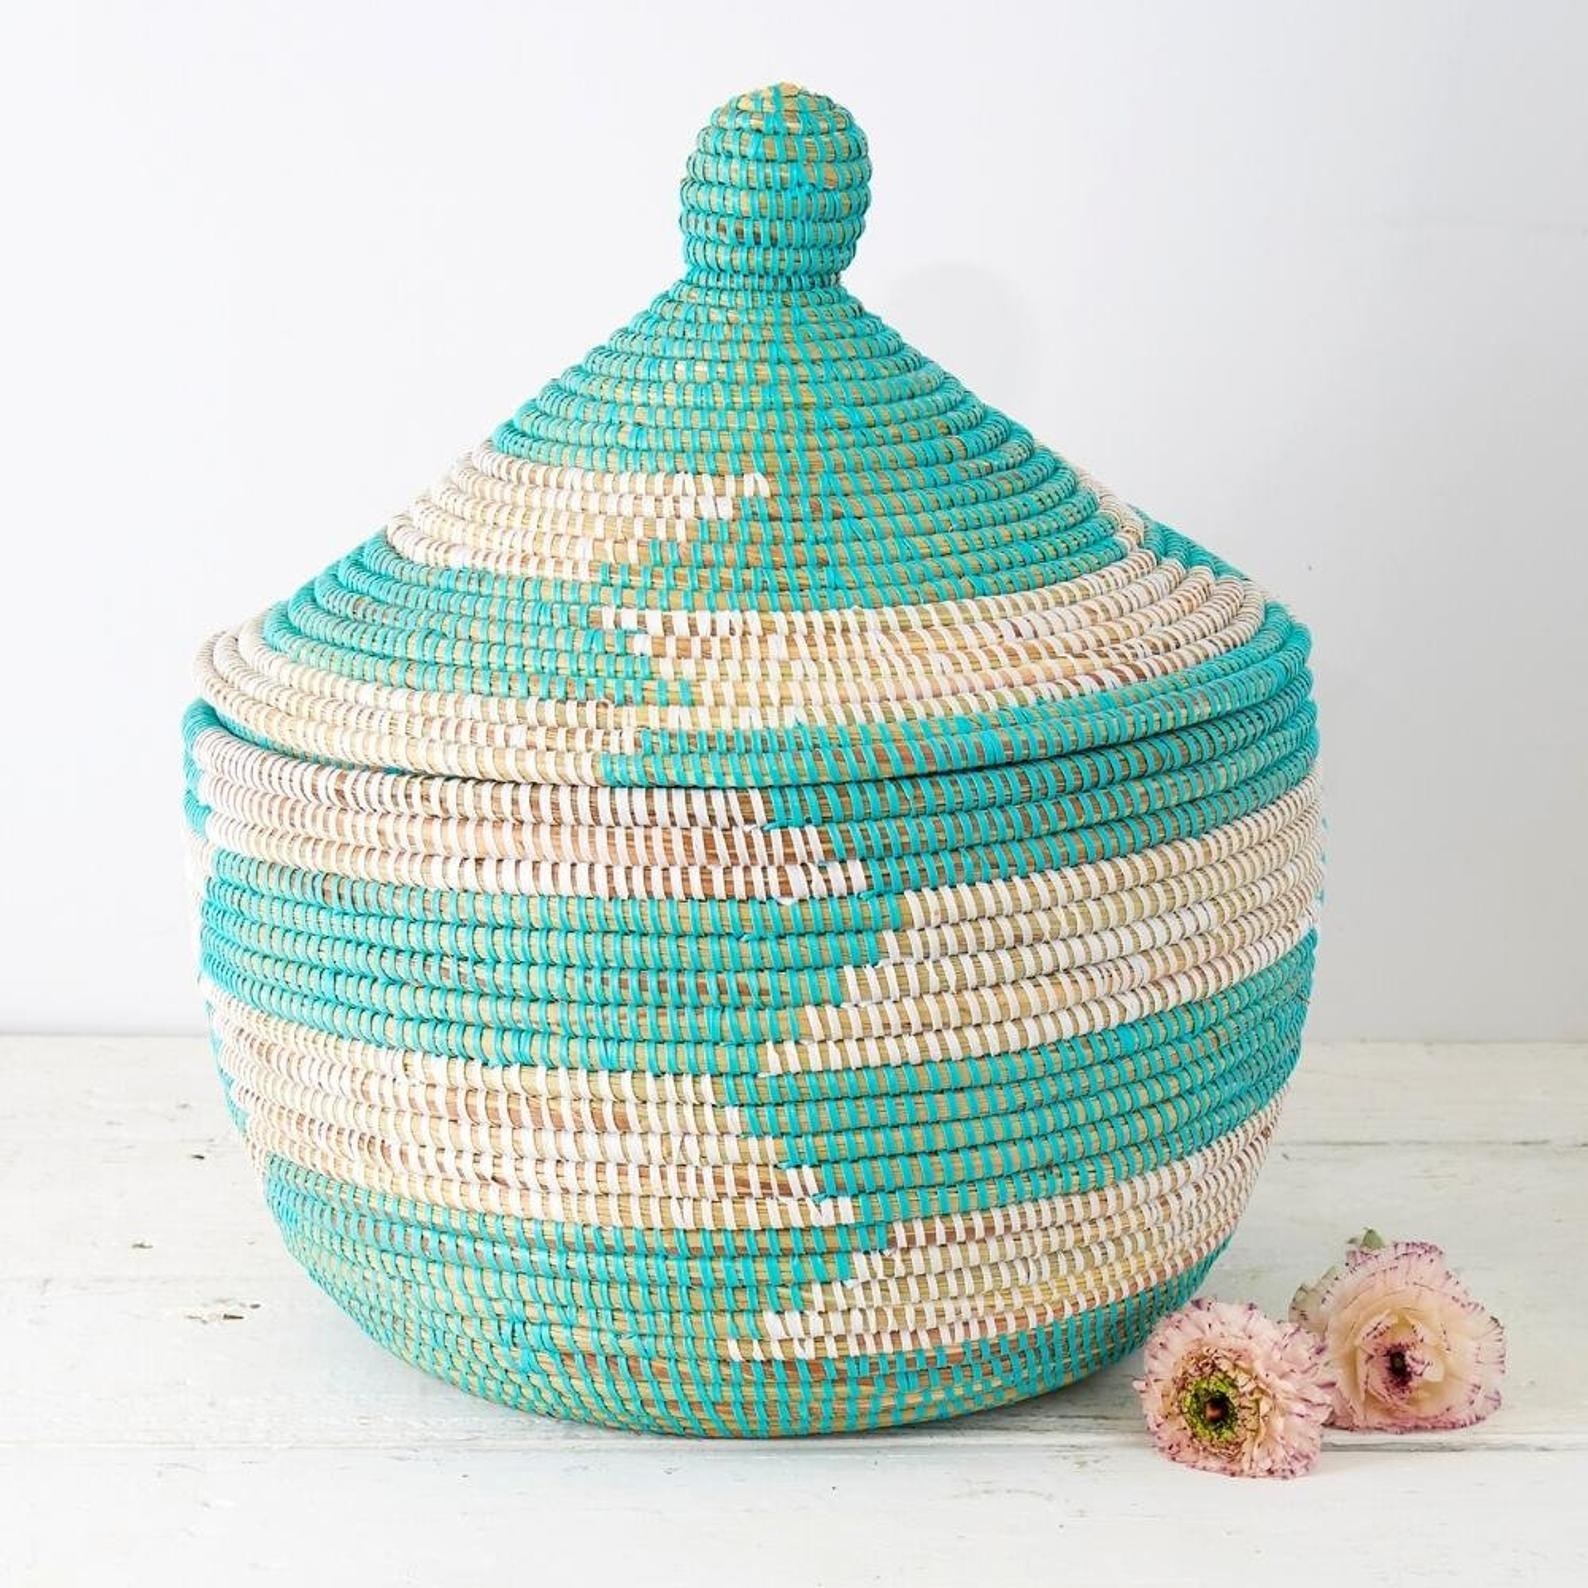 the turquoise basket which has a lid